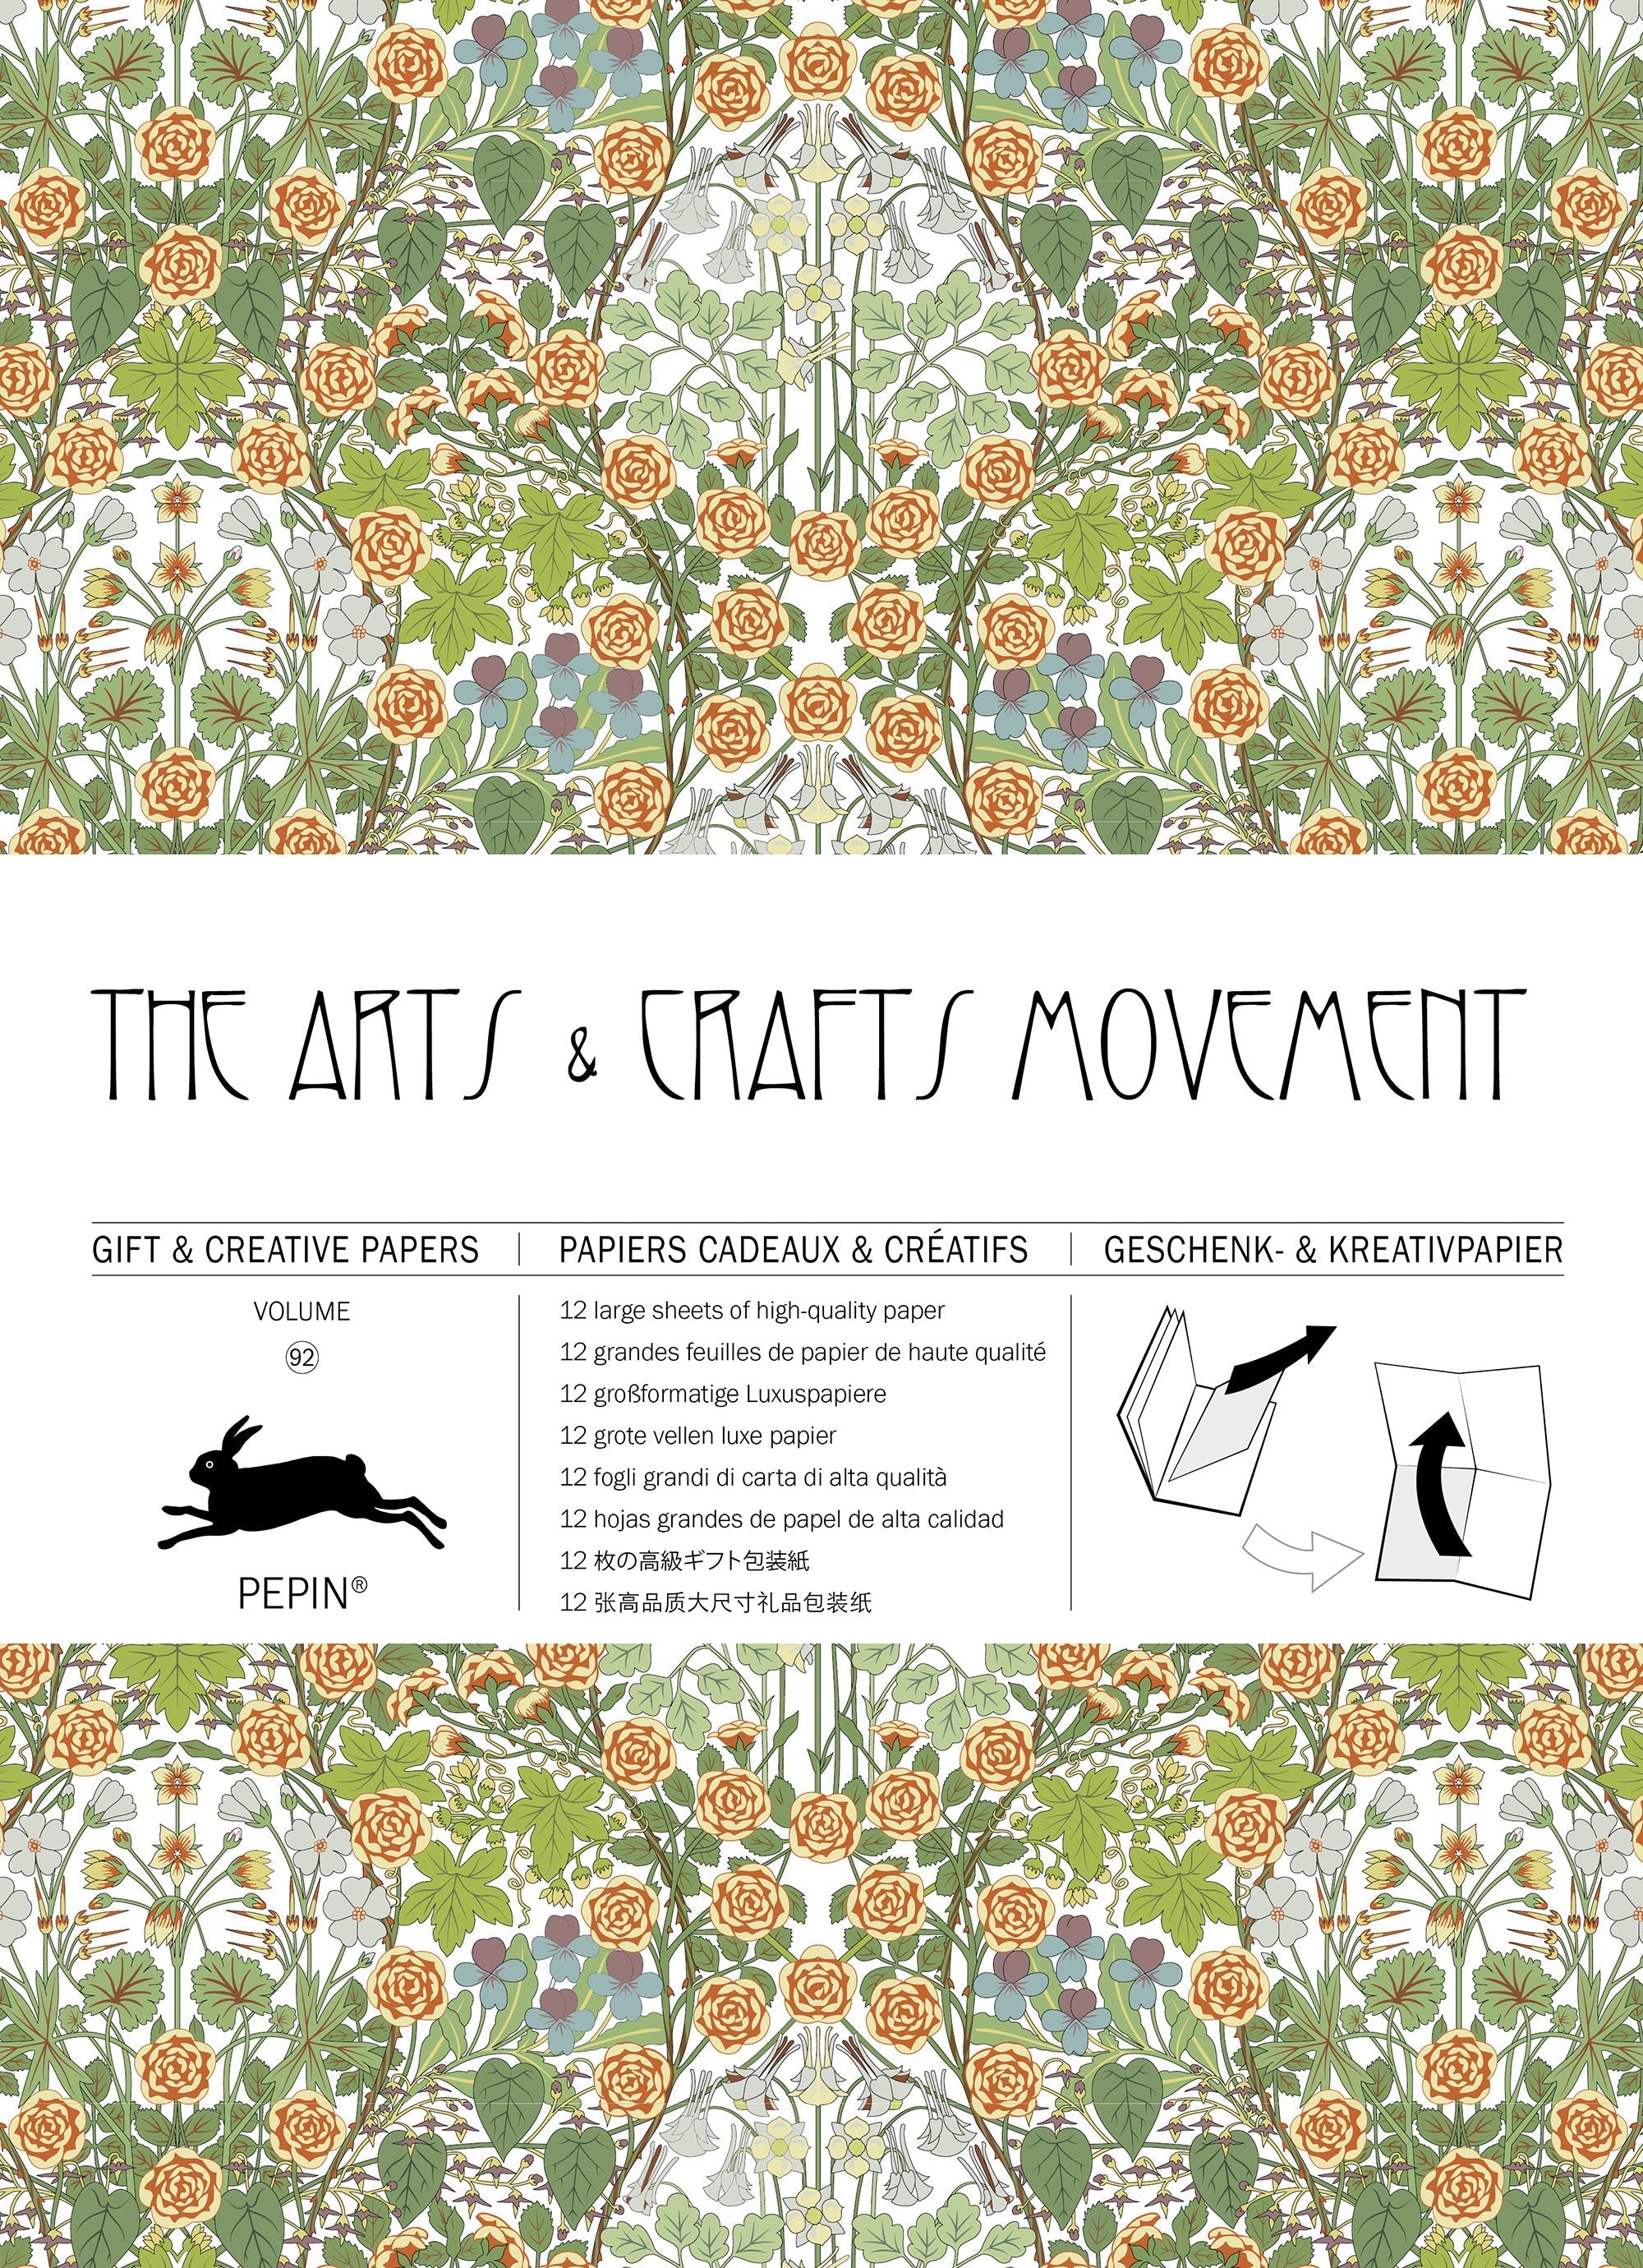 Gift & creative papers - Arts & Crafts Movement